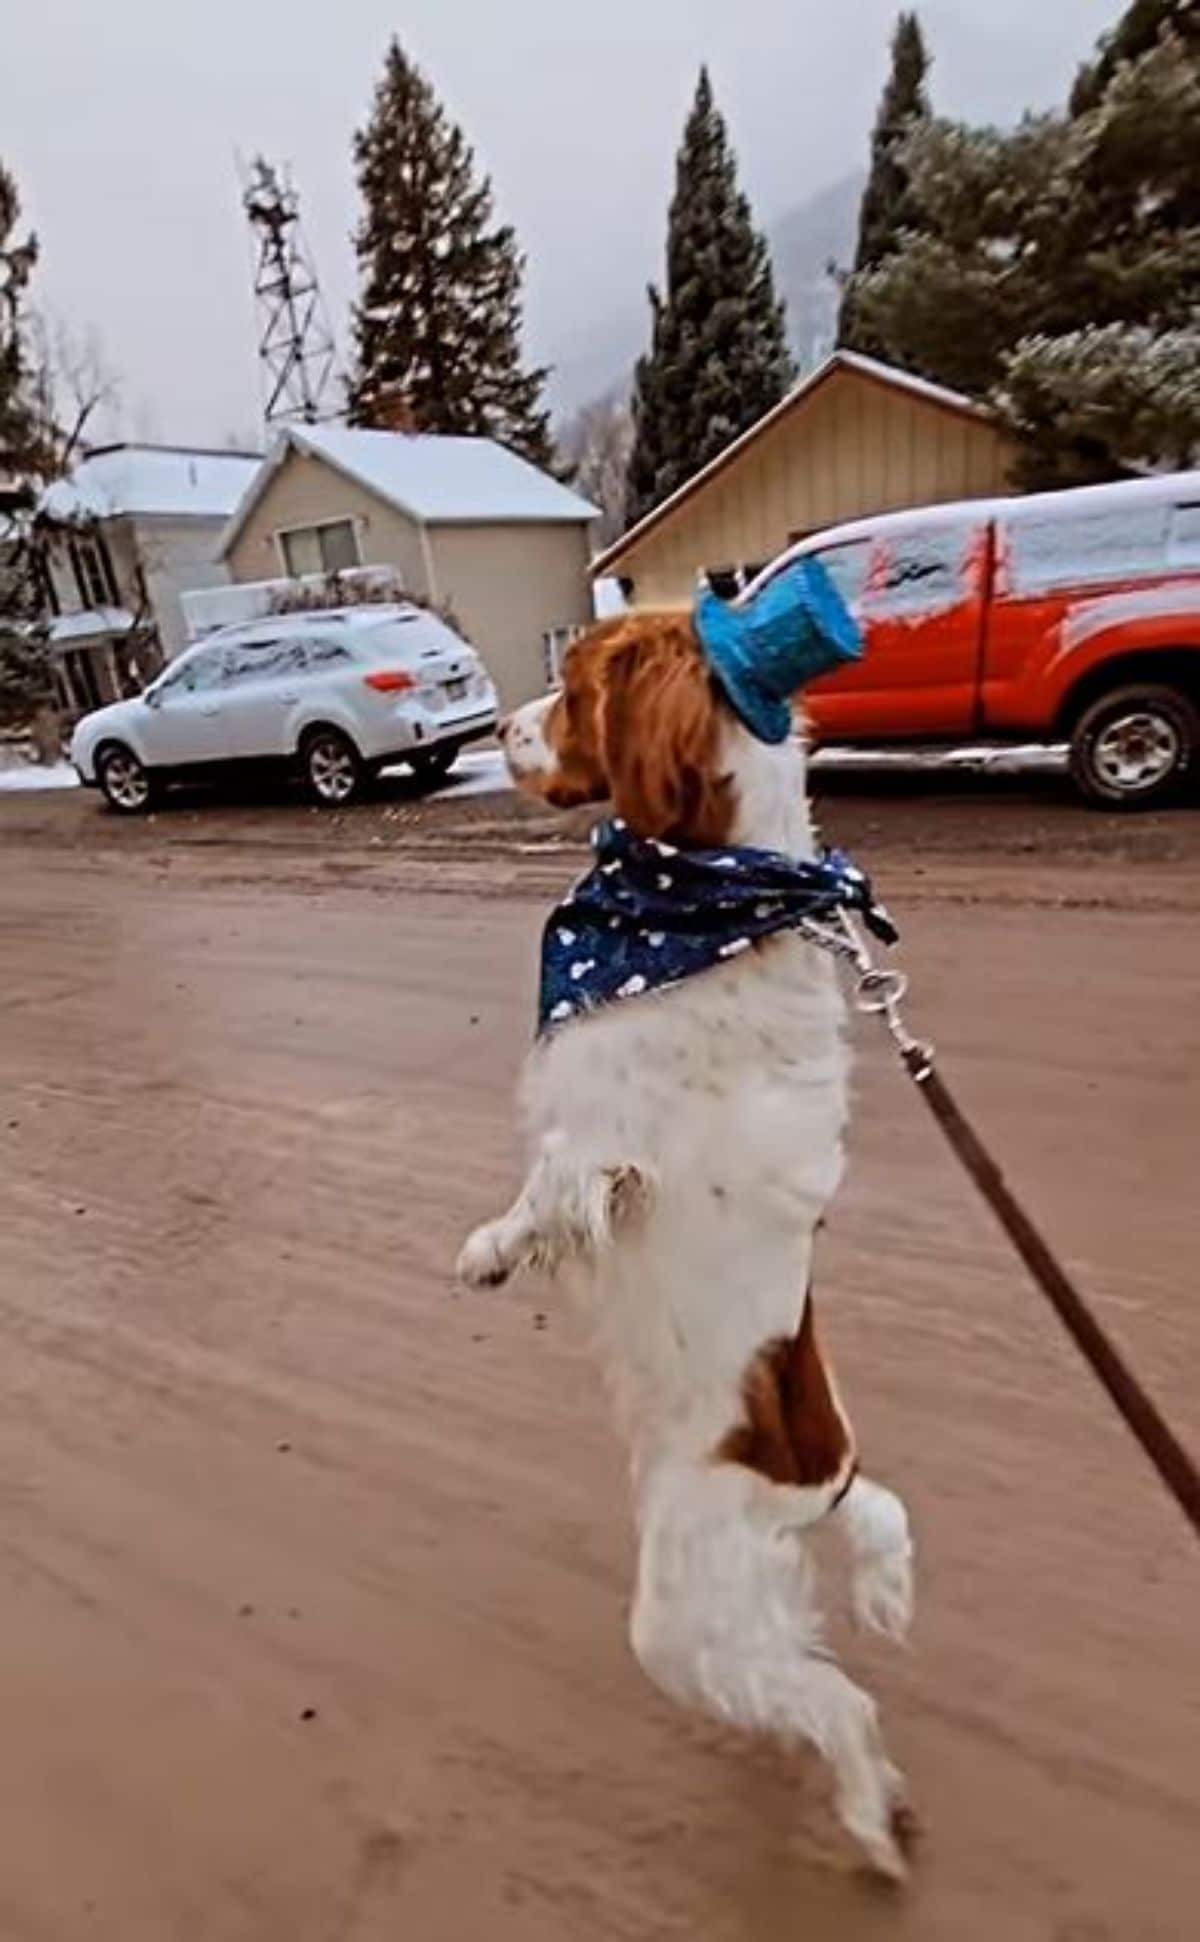 brown and white dog on a leash walking on hind legs wearing a blue hat